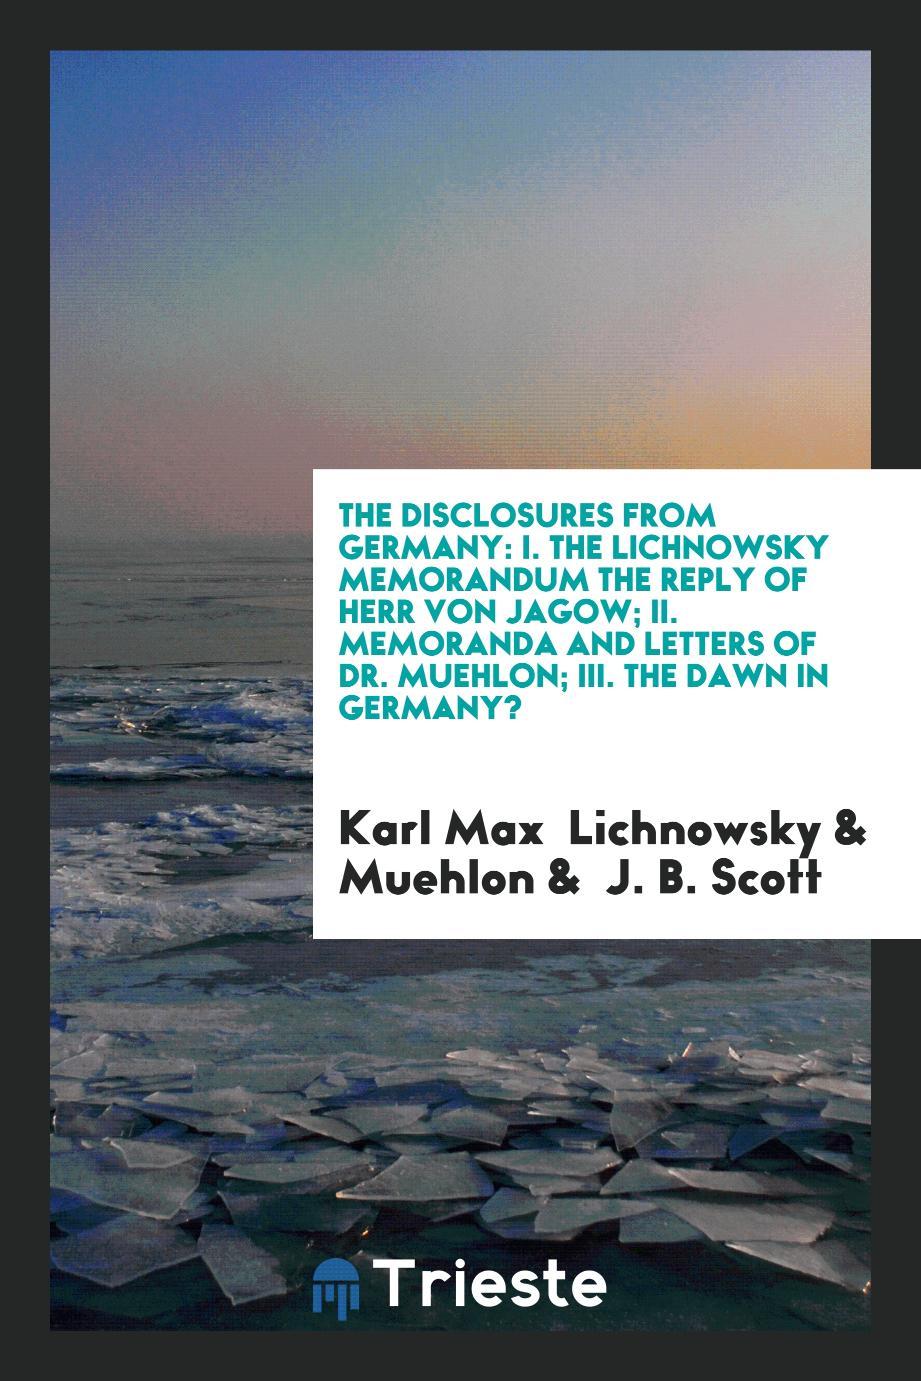 The Disclosures from Germany: I. The Lichnowsky Memorandum the Reply of Herr von Jagow; II. Memoranda and Letters of Dr. Muehlon; III. The Dawn in Germany?